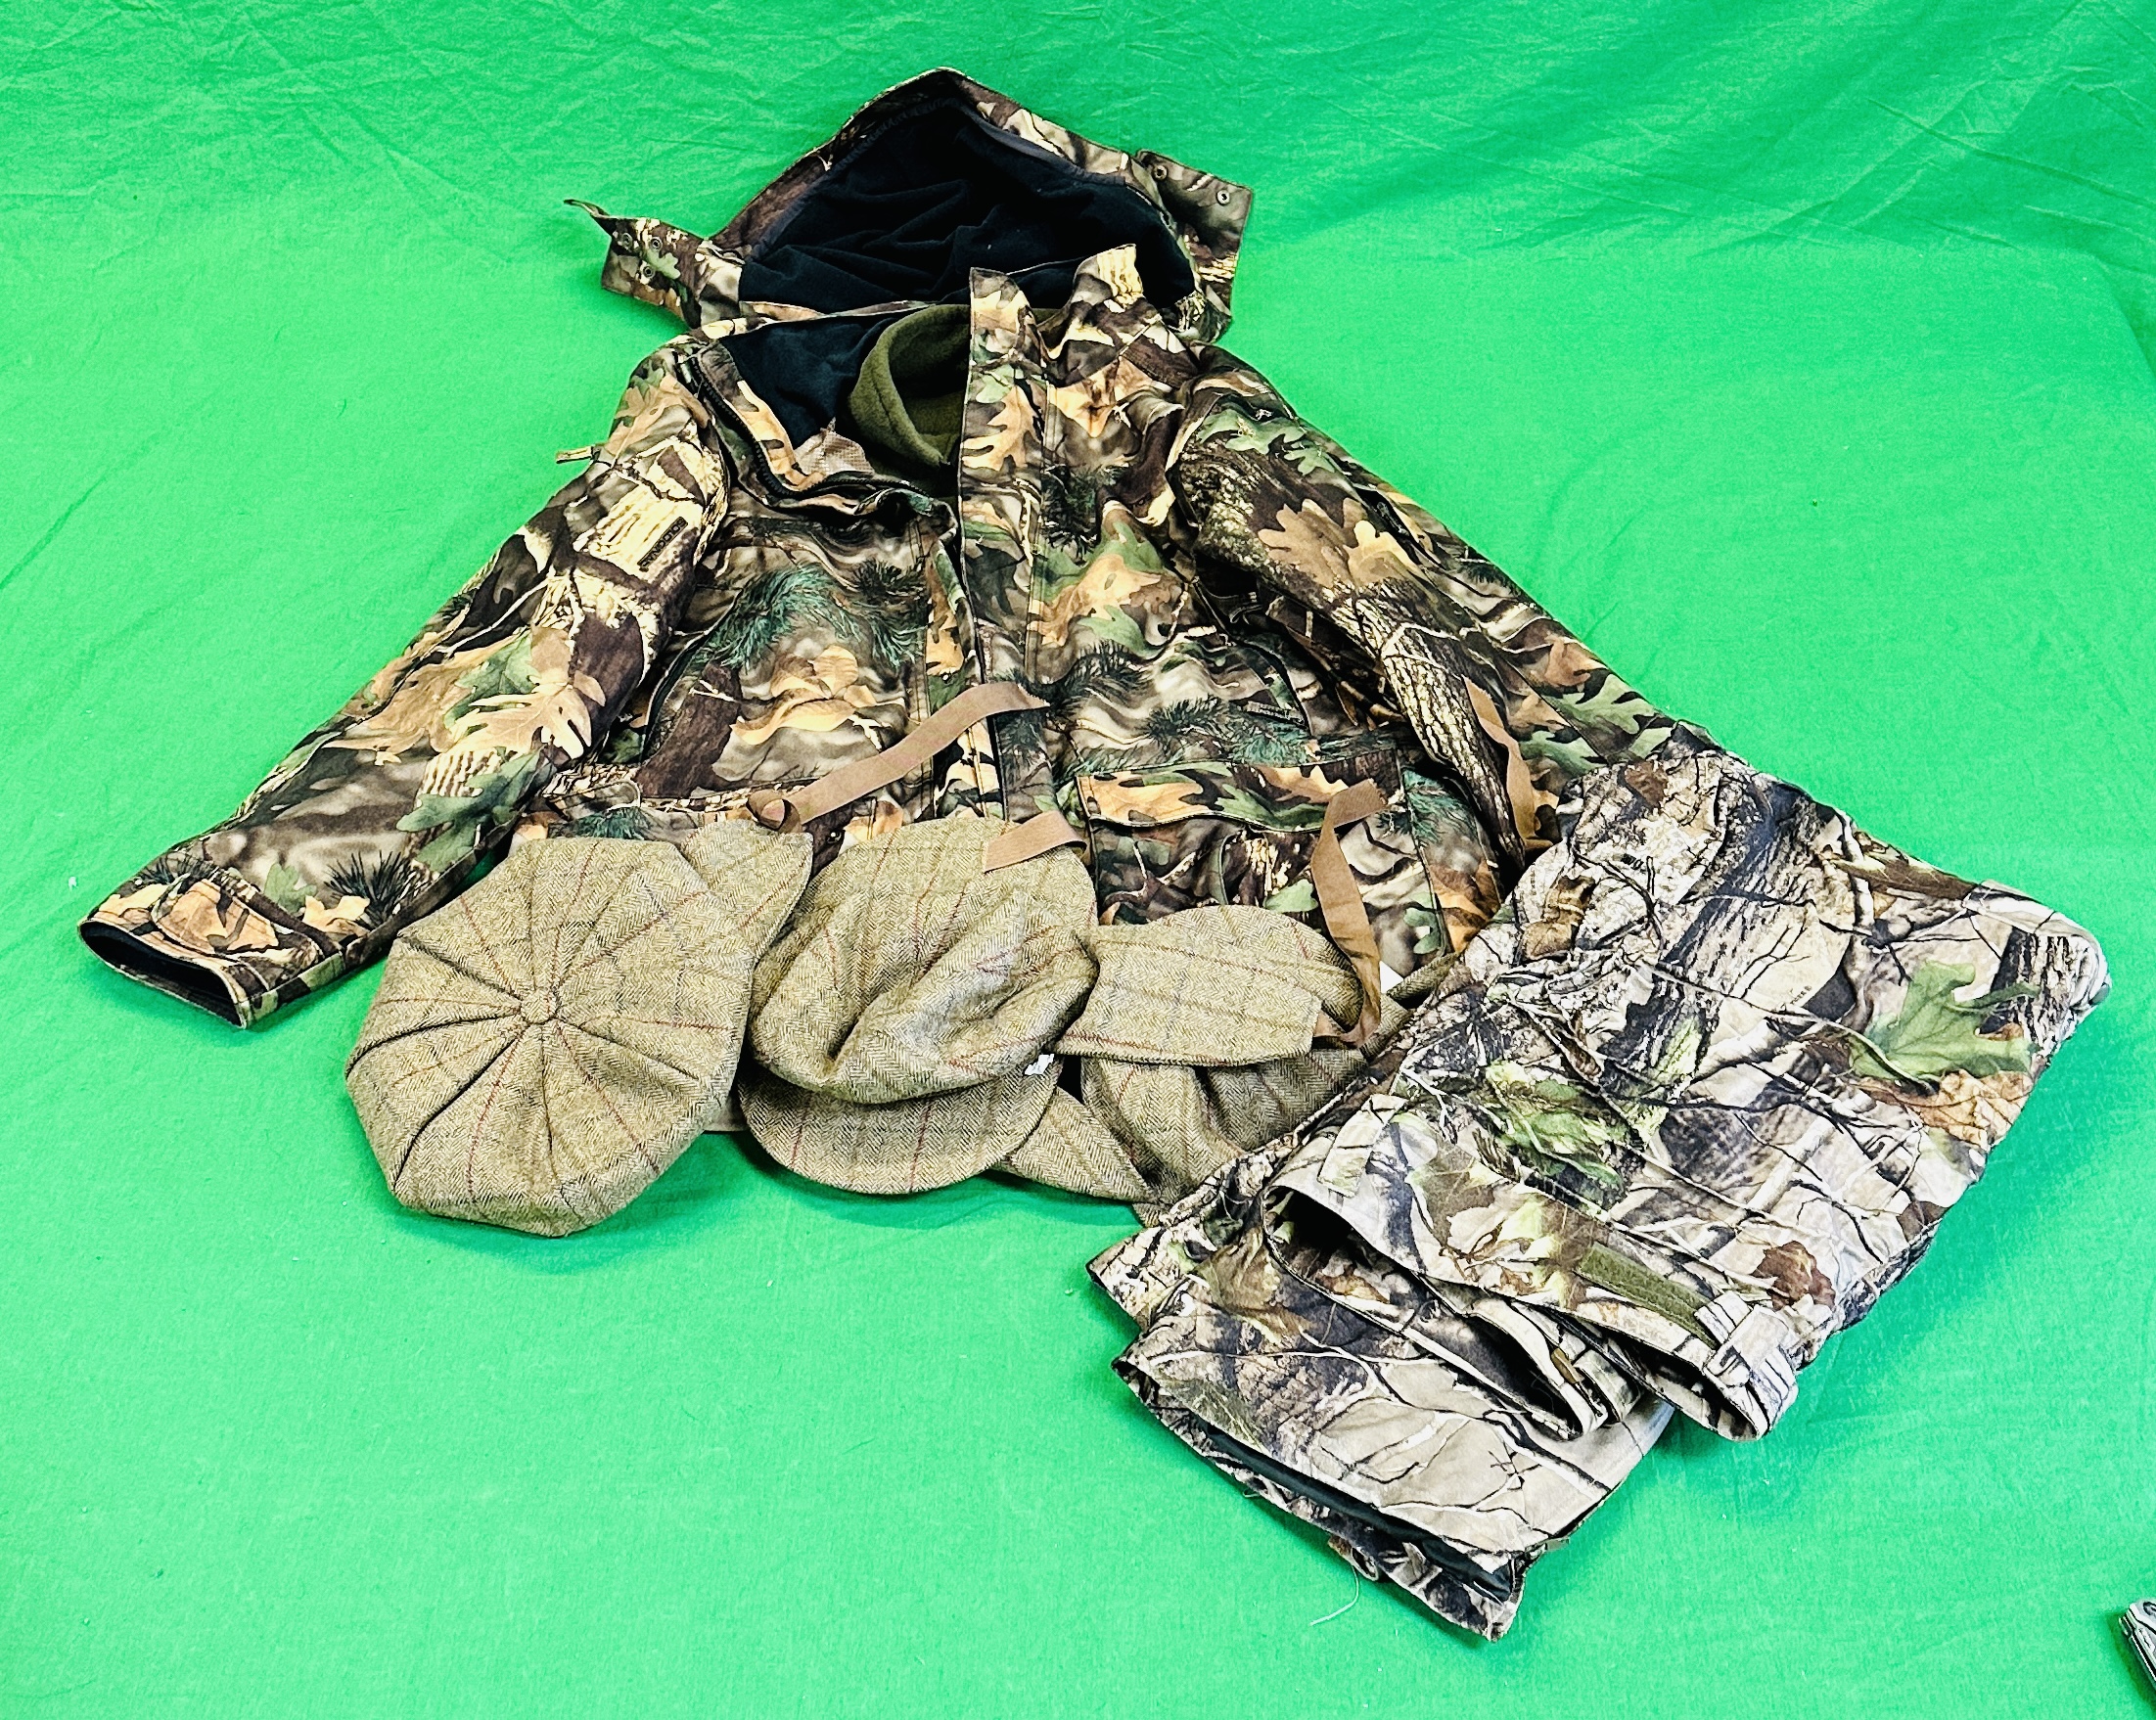 A SOLOGNAC XXL 3 IN 1 CAMOUFLAGE SHOOTING COAT ALONG WITH A PAIR OF MERGER XL CAMOUFLAGE TROUSERS